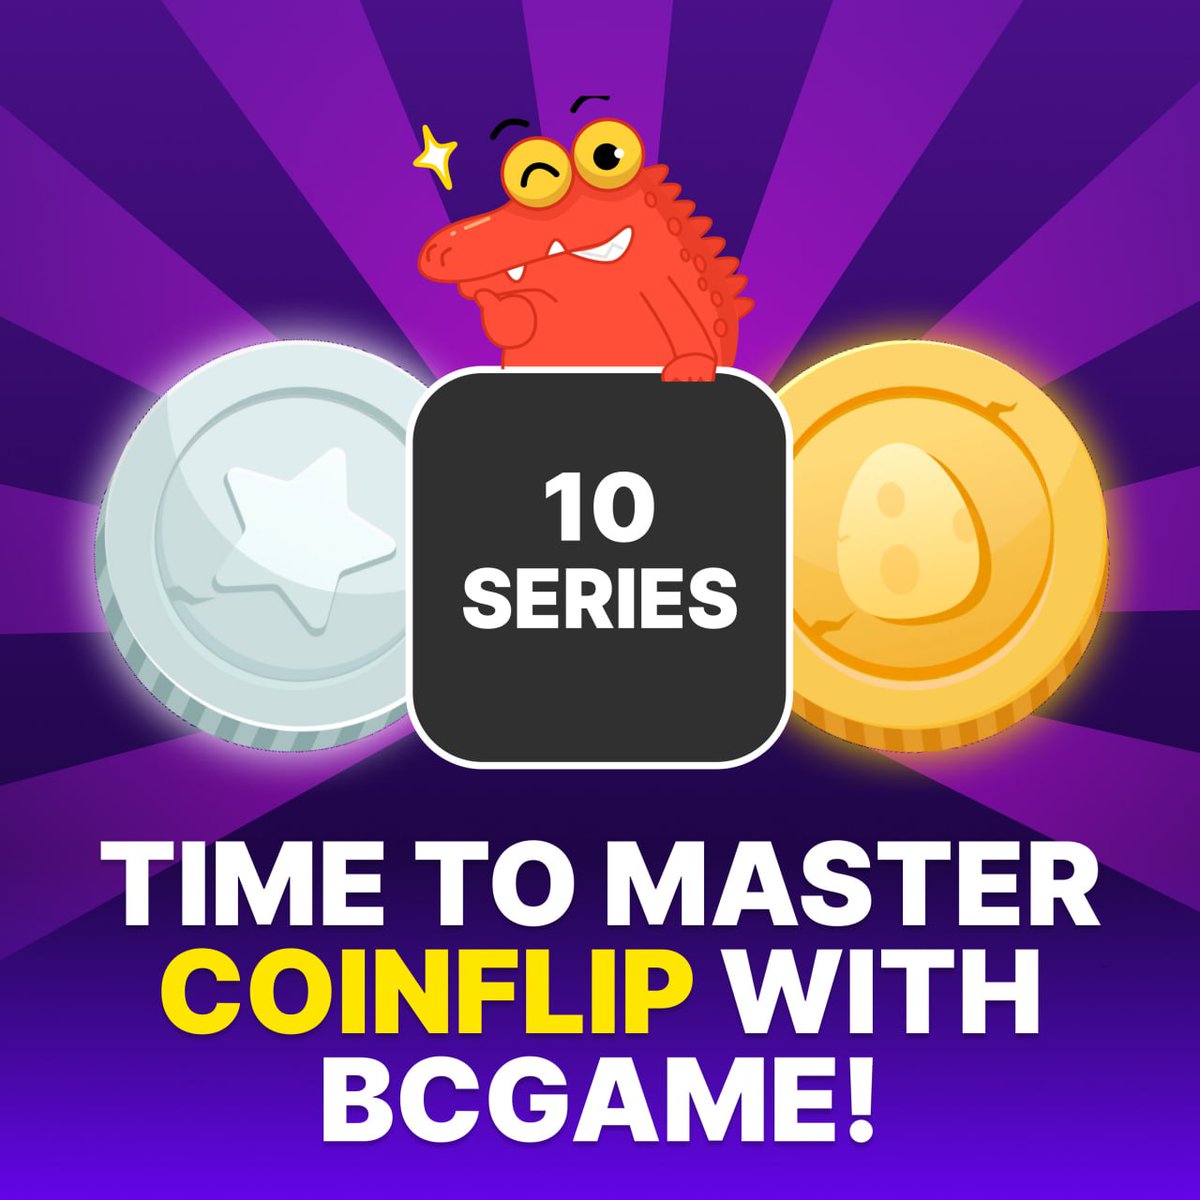 🌕 Time to master CoinFlip with #BCGAME! 🪙 Toss a coin 5-10 times, record the video with close-ups of the outcomes, and share in your reply. Let’s count those heads and tails! 10 lucky winners will snag a surprise reward! Don’t forget to include UID in your reply! #coinflip